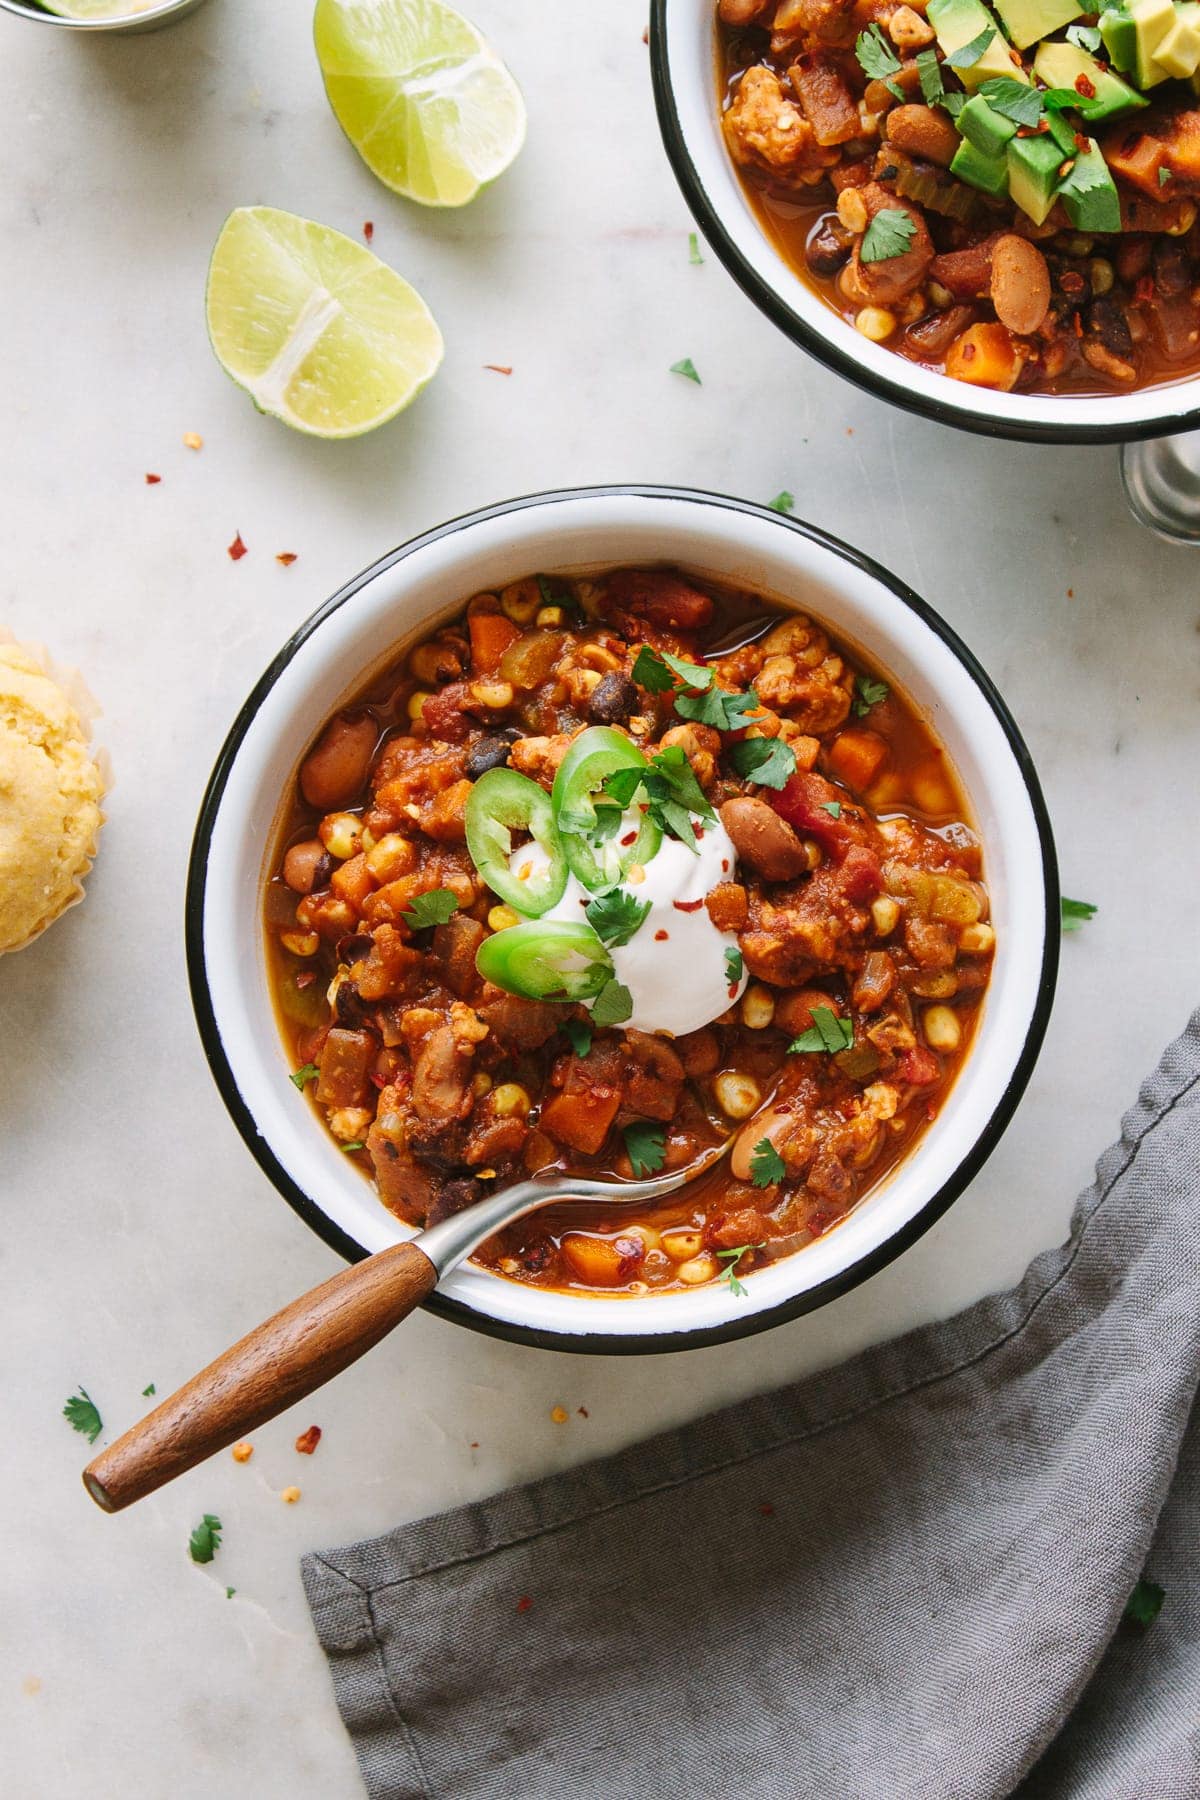 EASY VEGETABLE CHILI (SLOW COOKER OR STOVETOP)